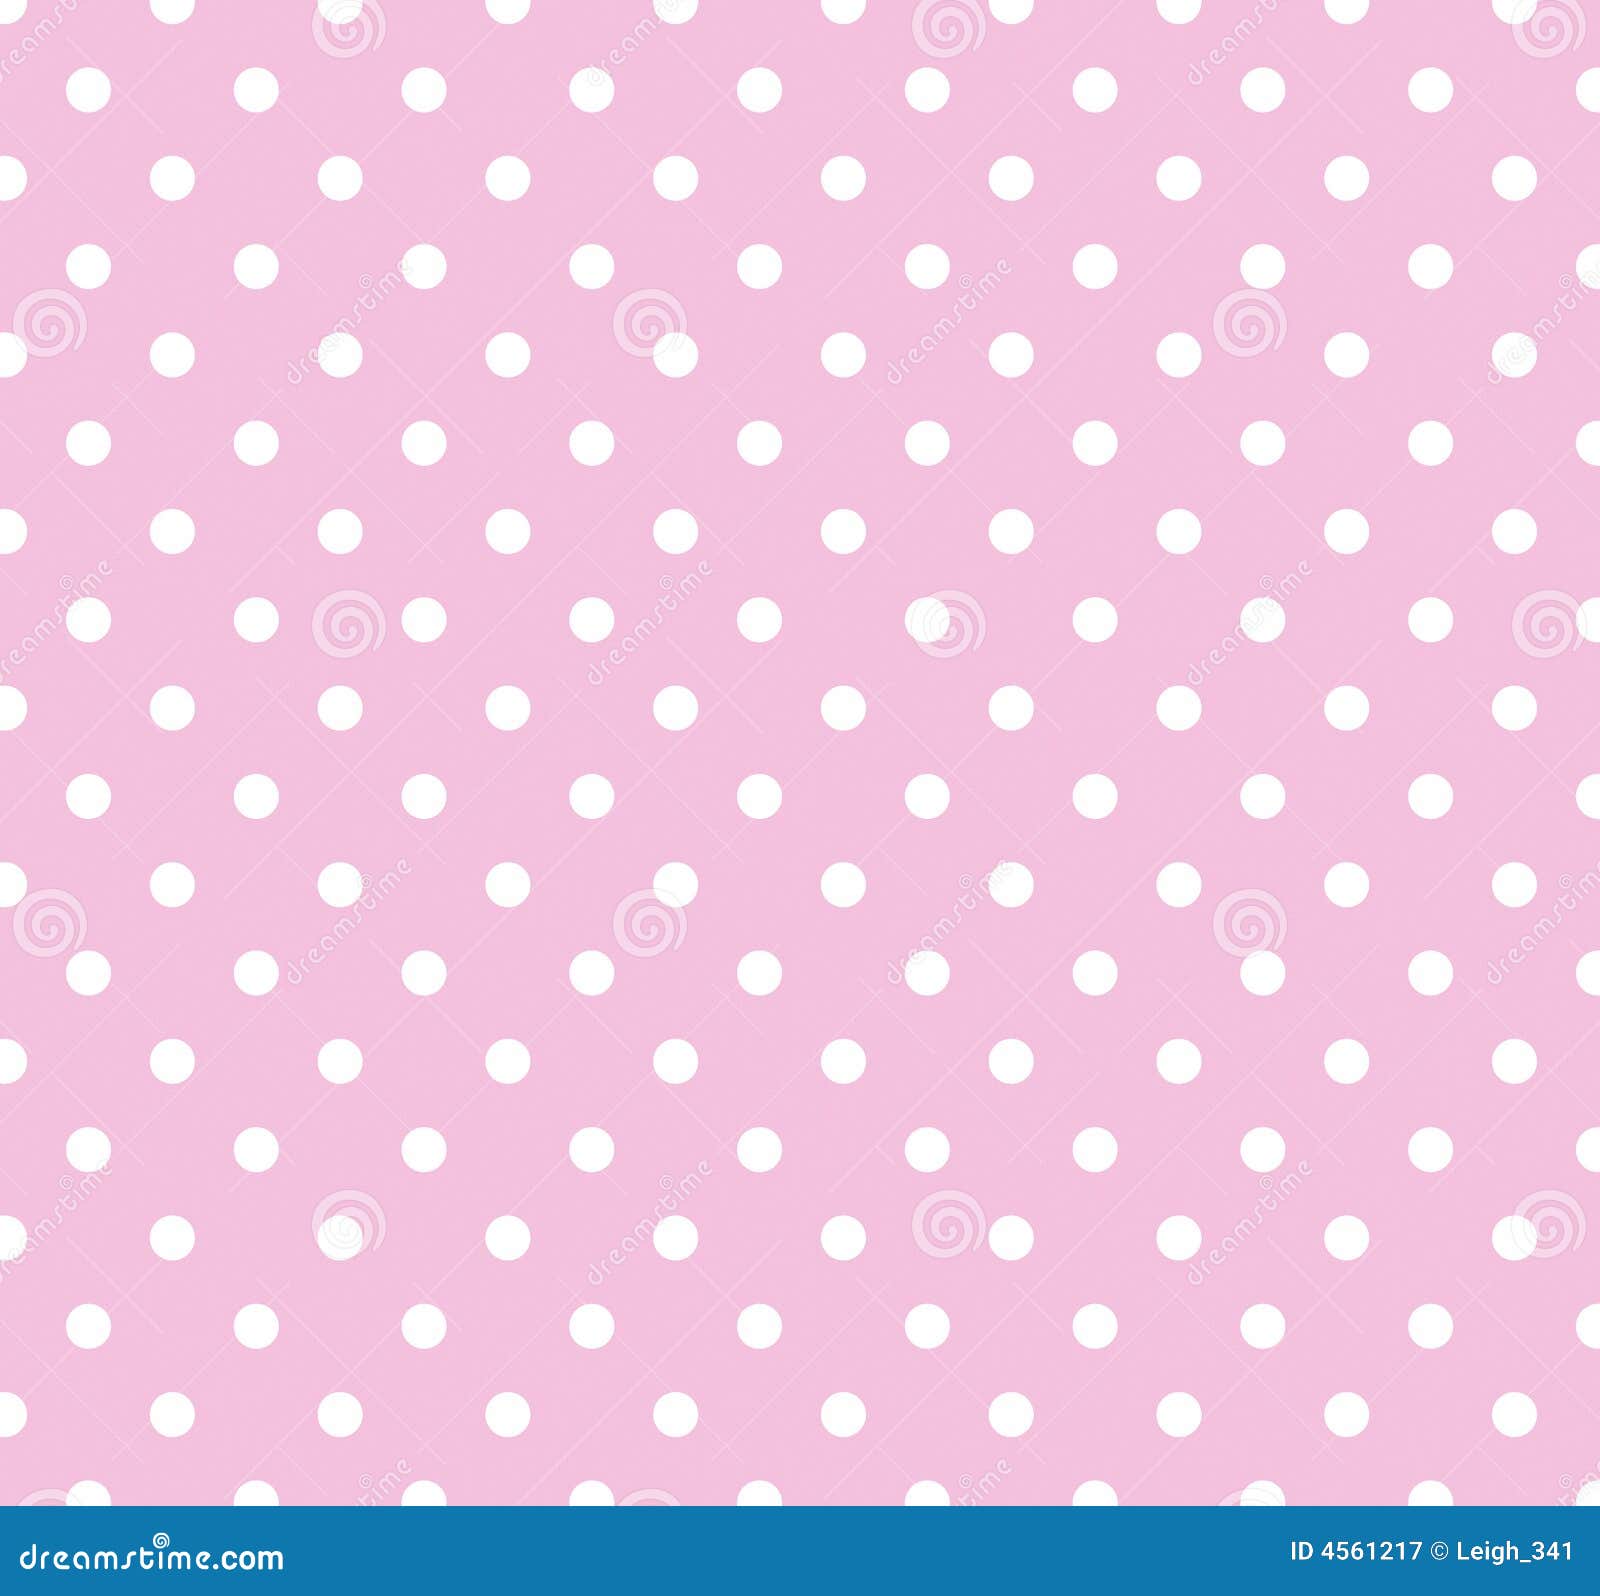 pink with white polka dots